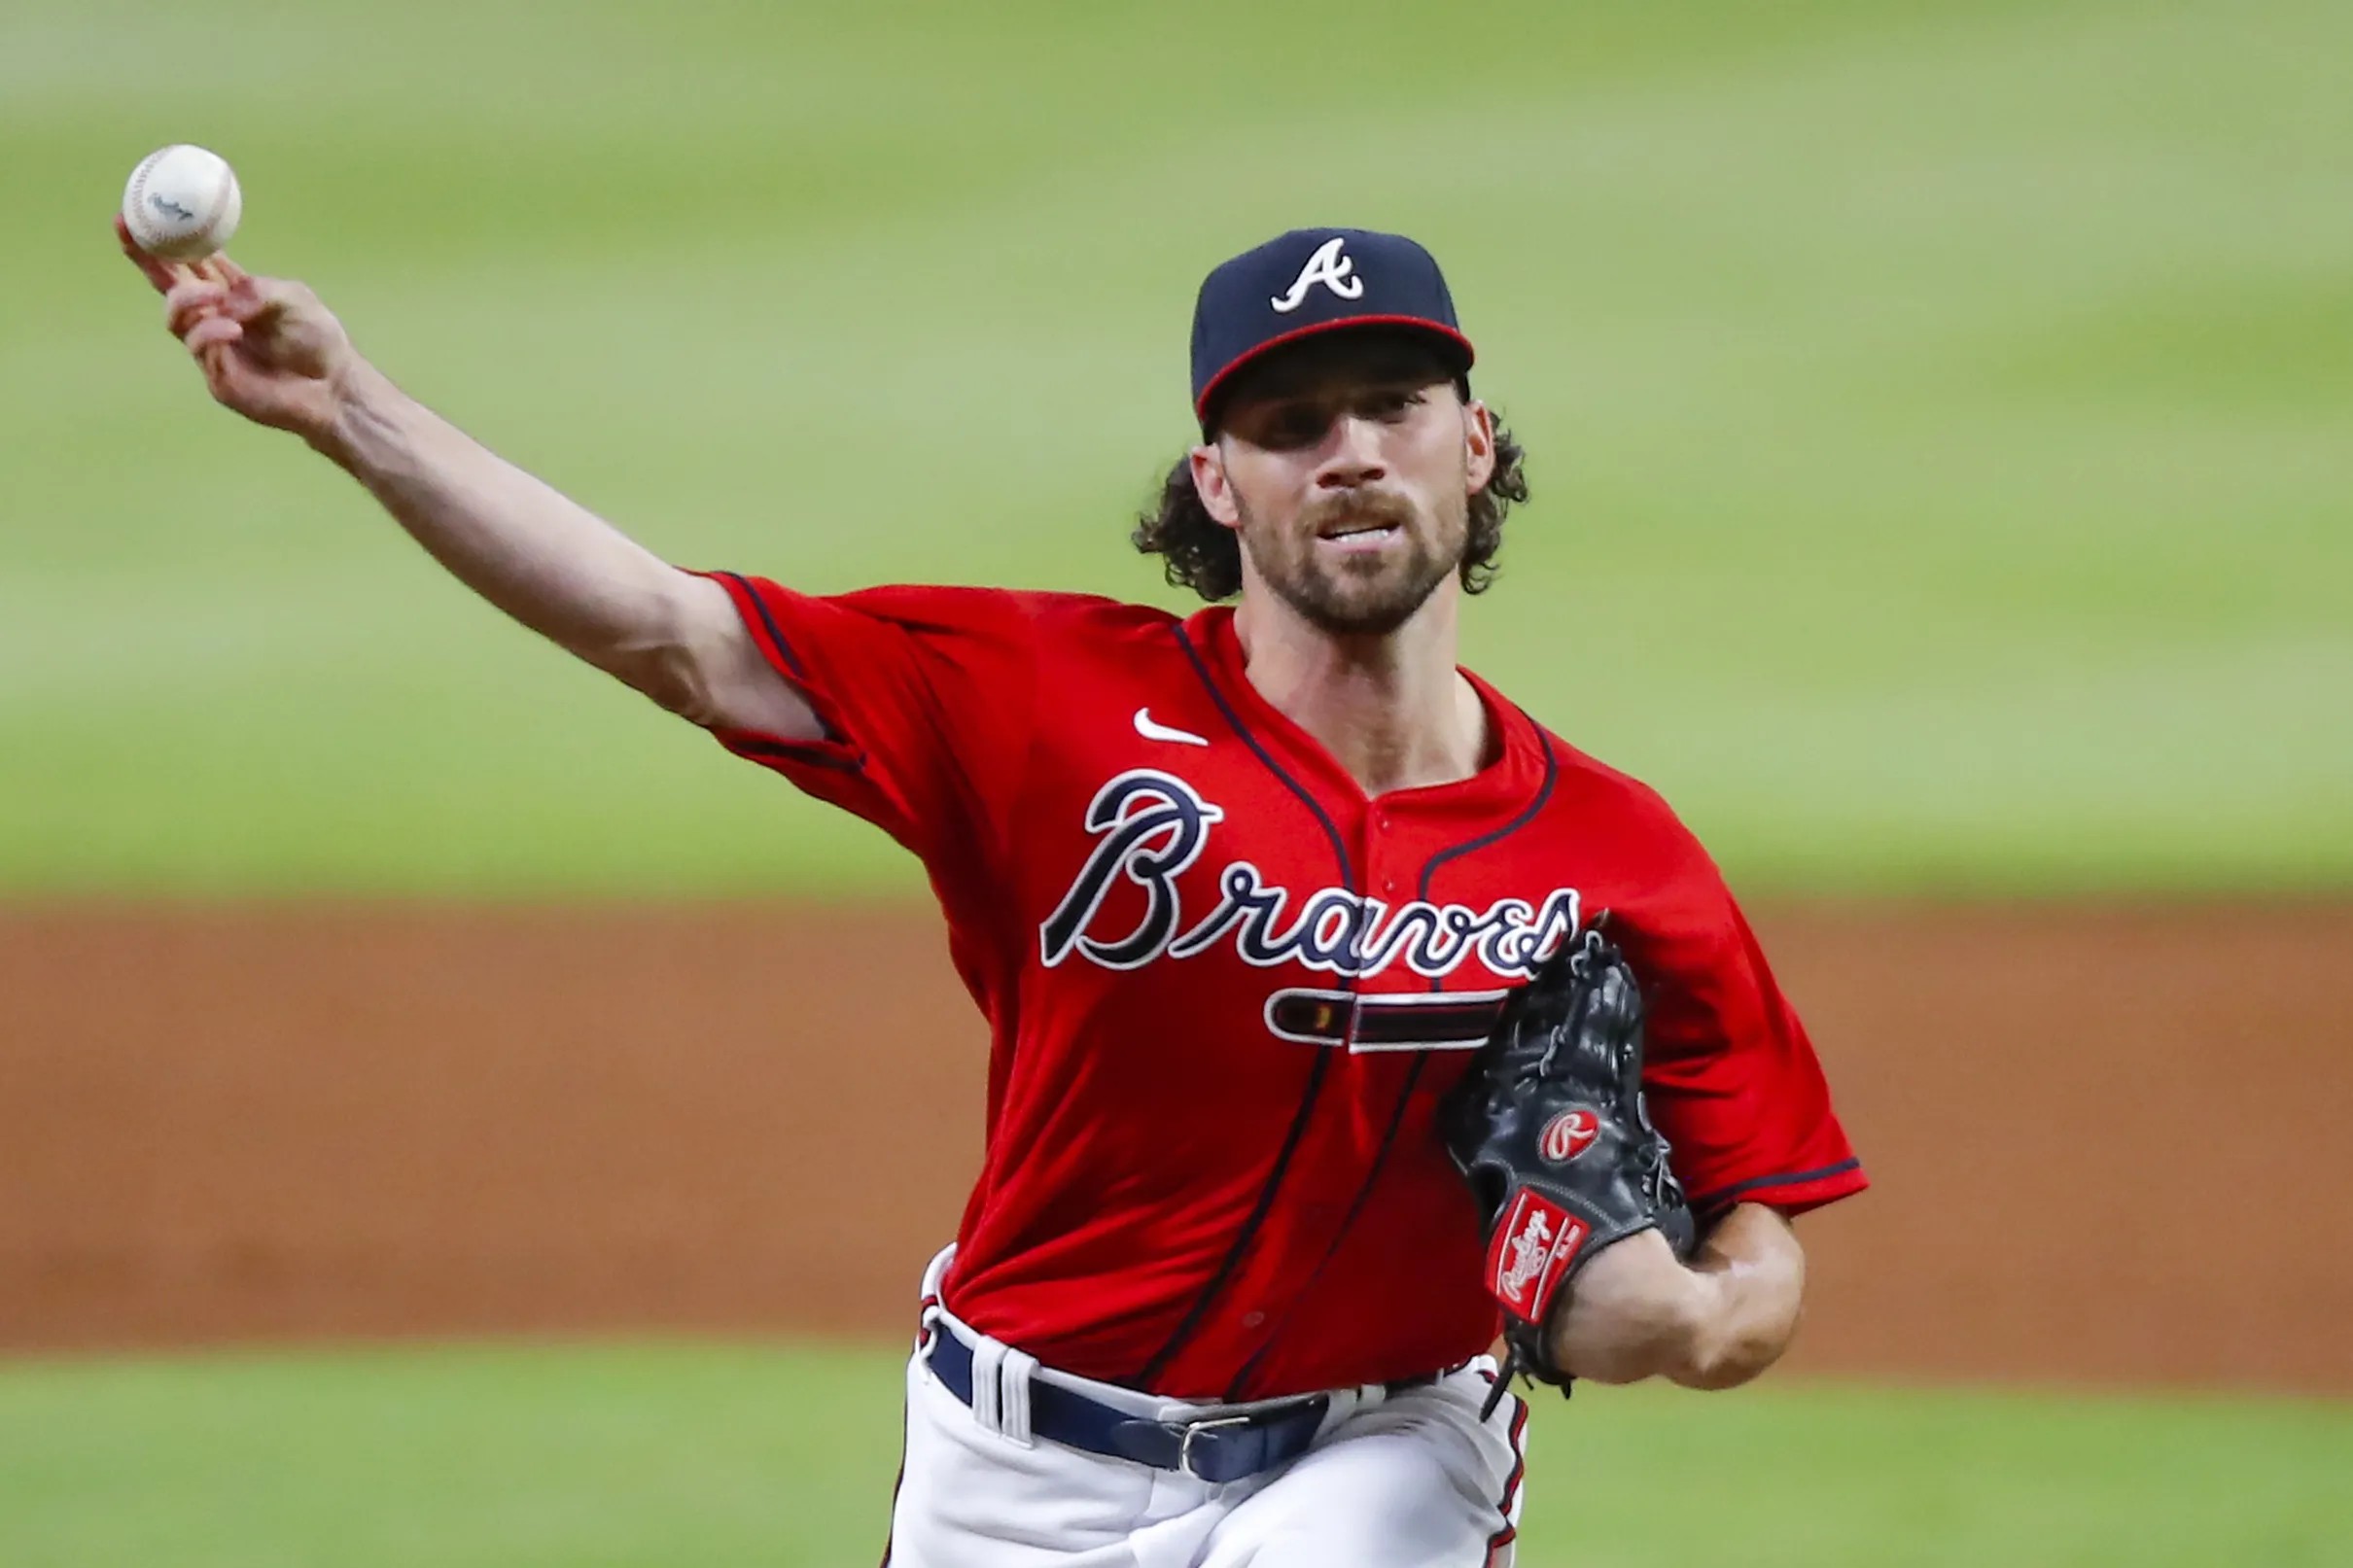 Charlie Culberson is now a relief pitcher (yes, really)